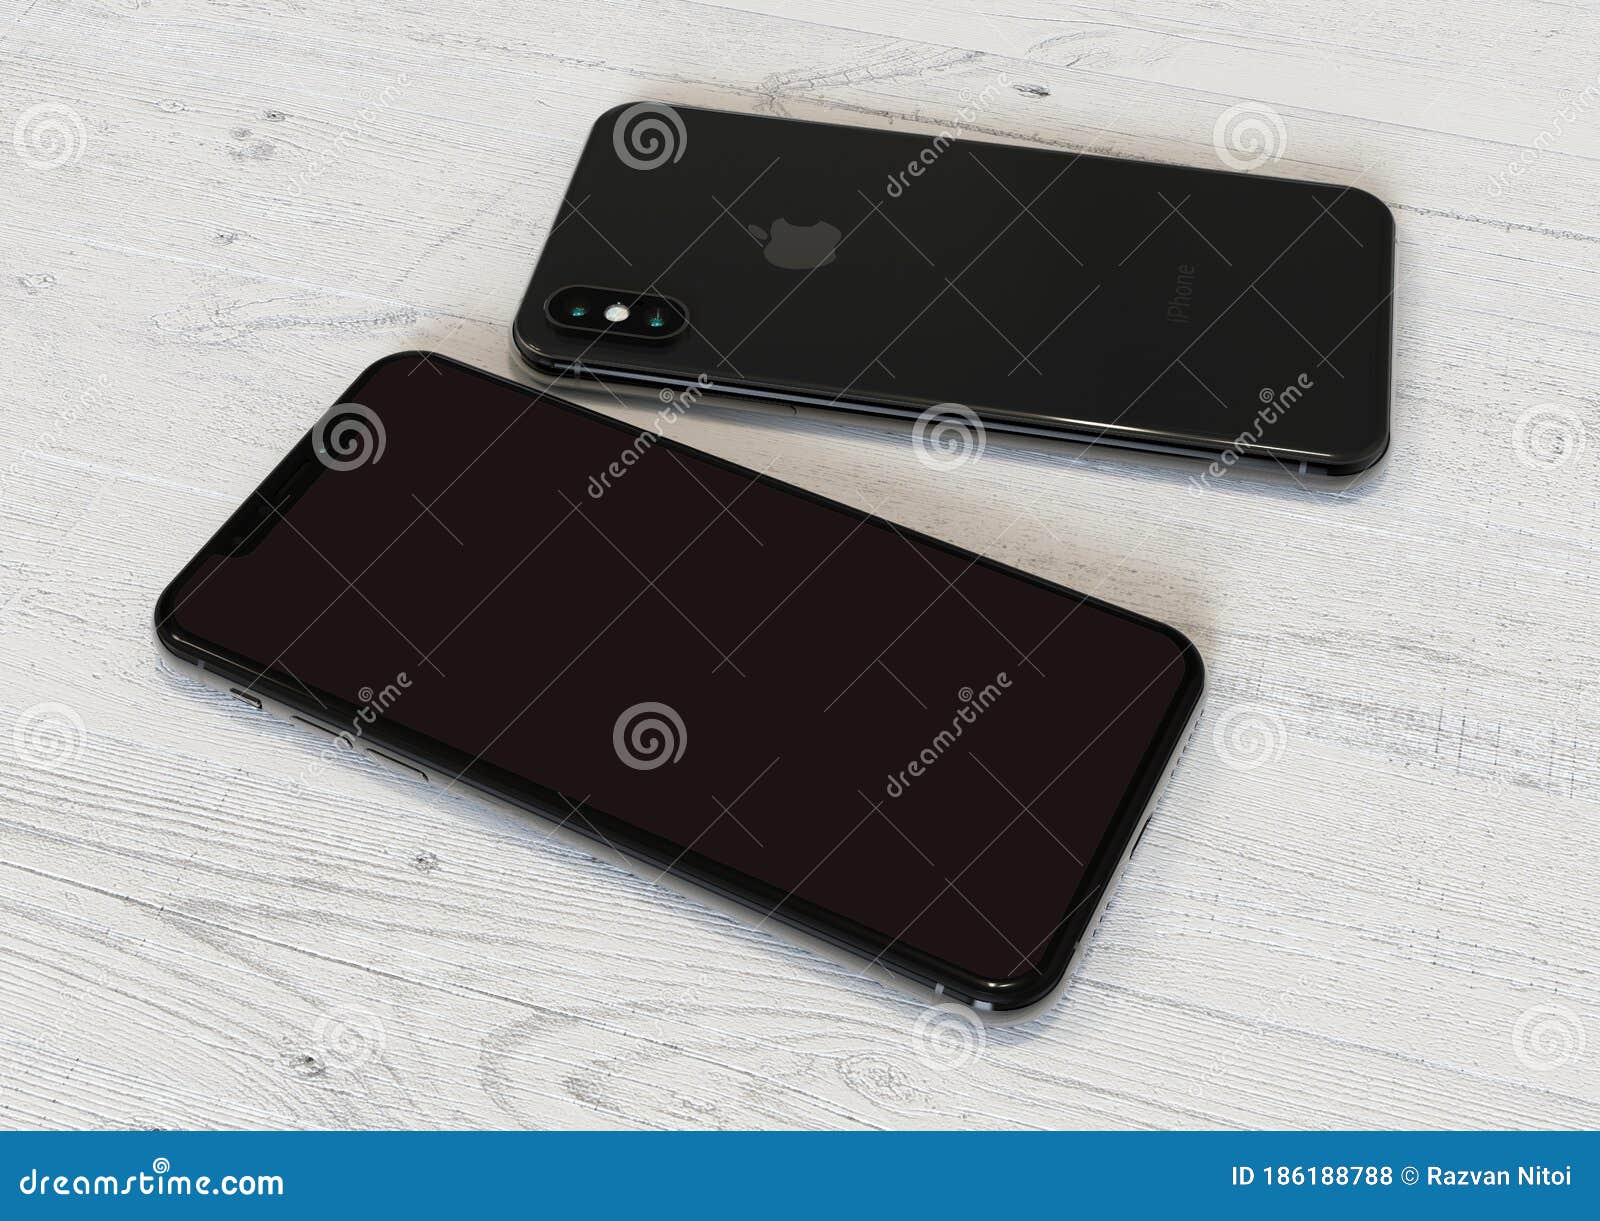 Apple IPhone XS Max Space Grey, Front and Back Sides Editorial Stock